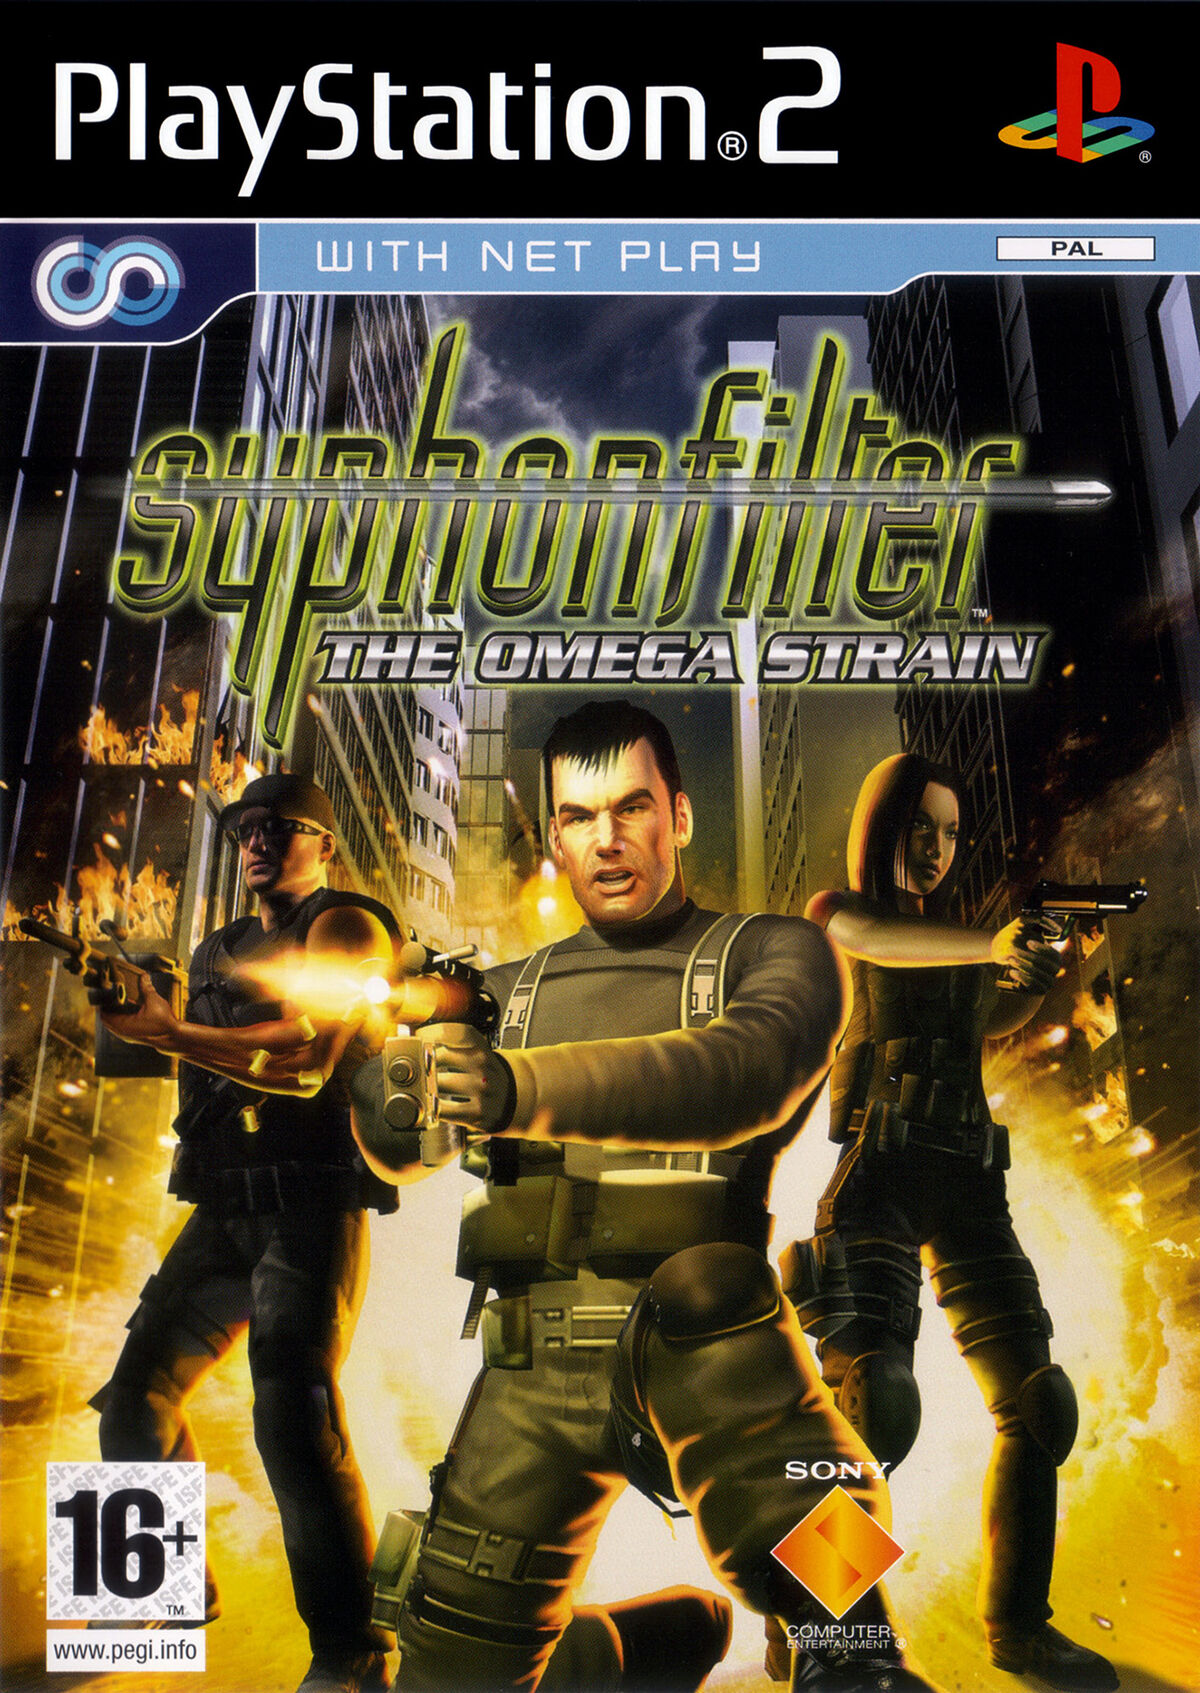 Creating the PERFECT Sequel! - Syphon Filter 2 PS1 Retrospective